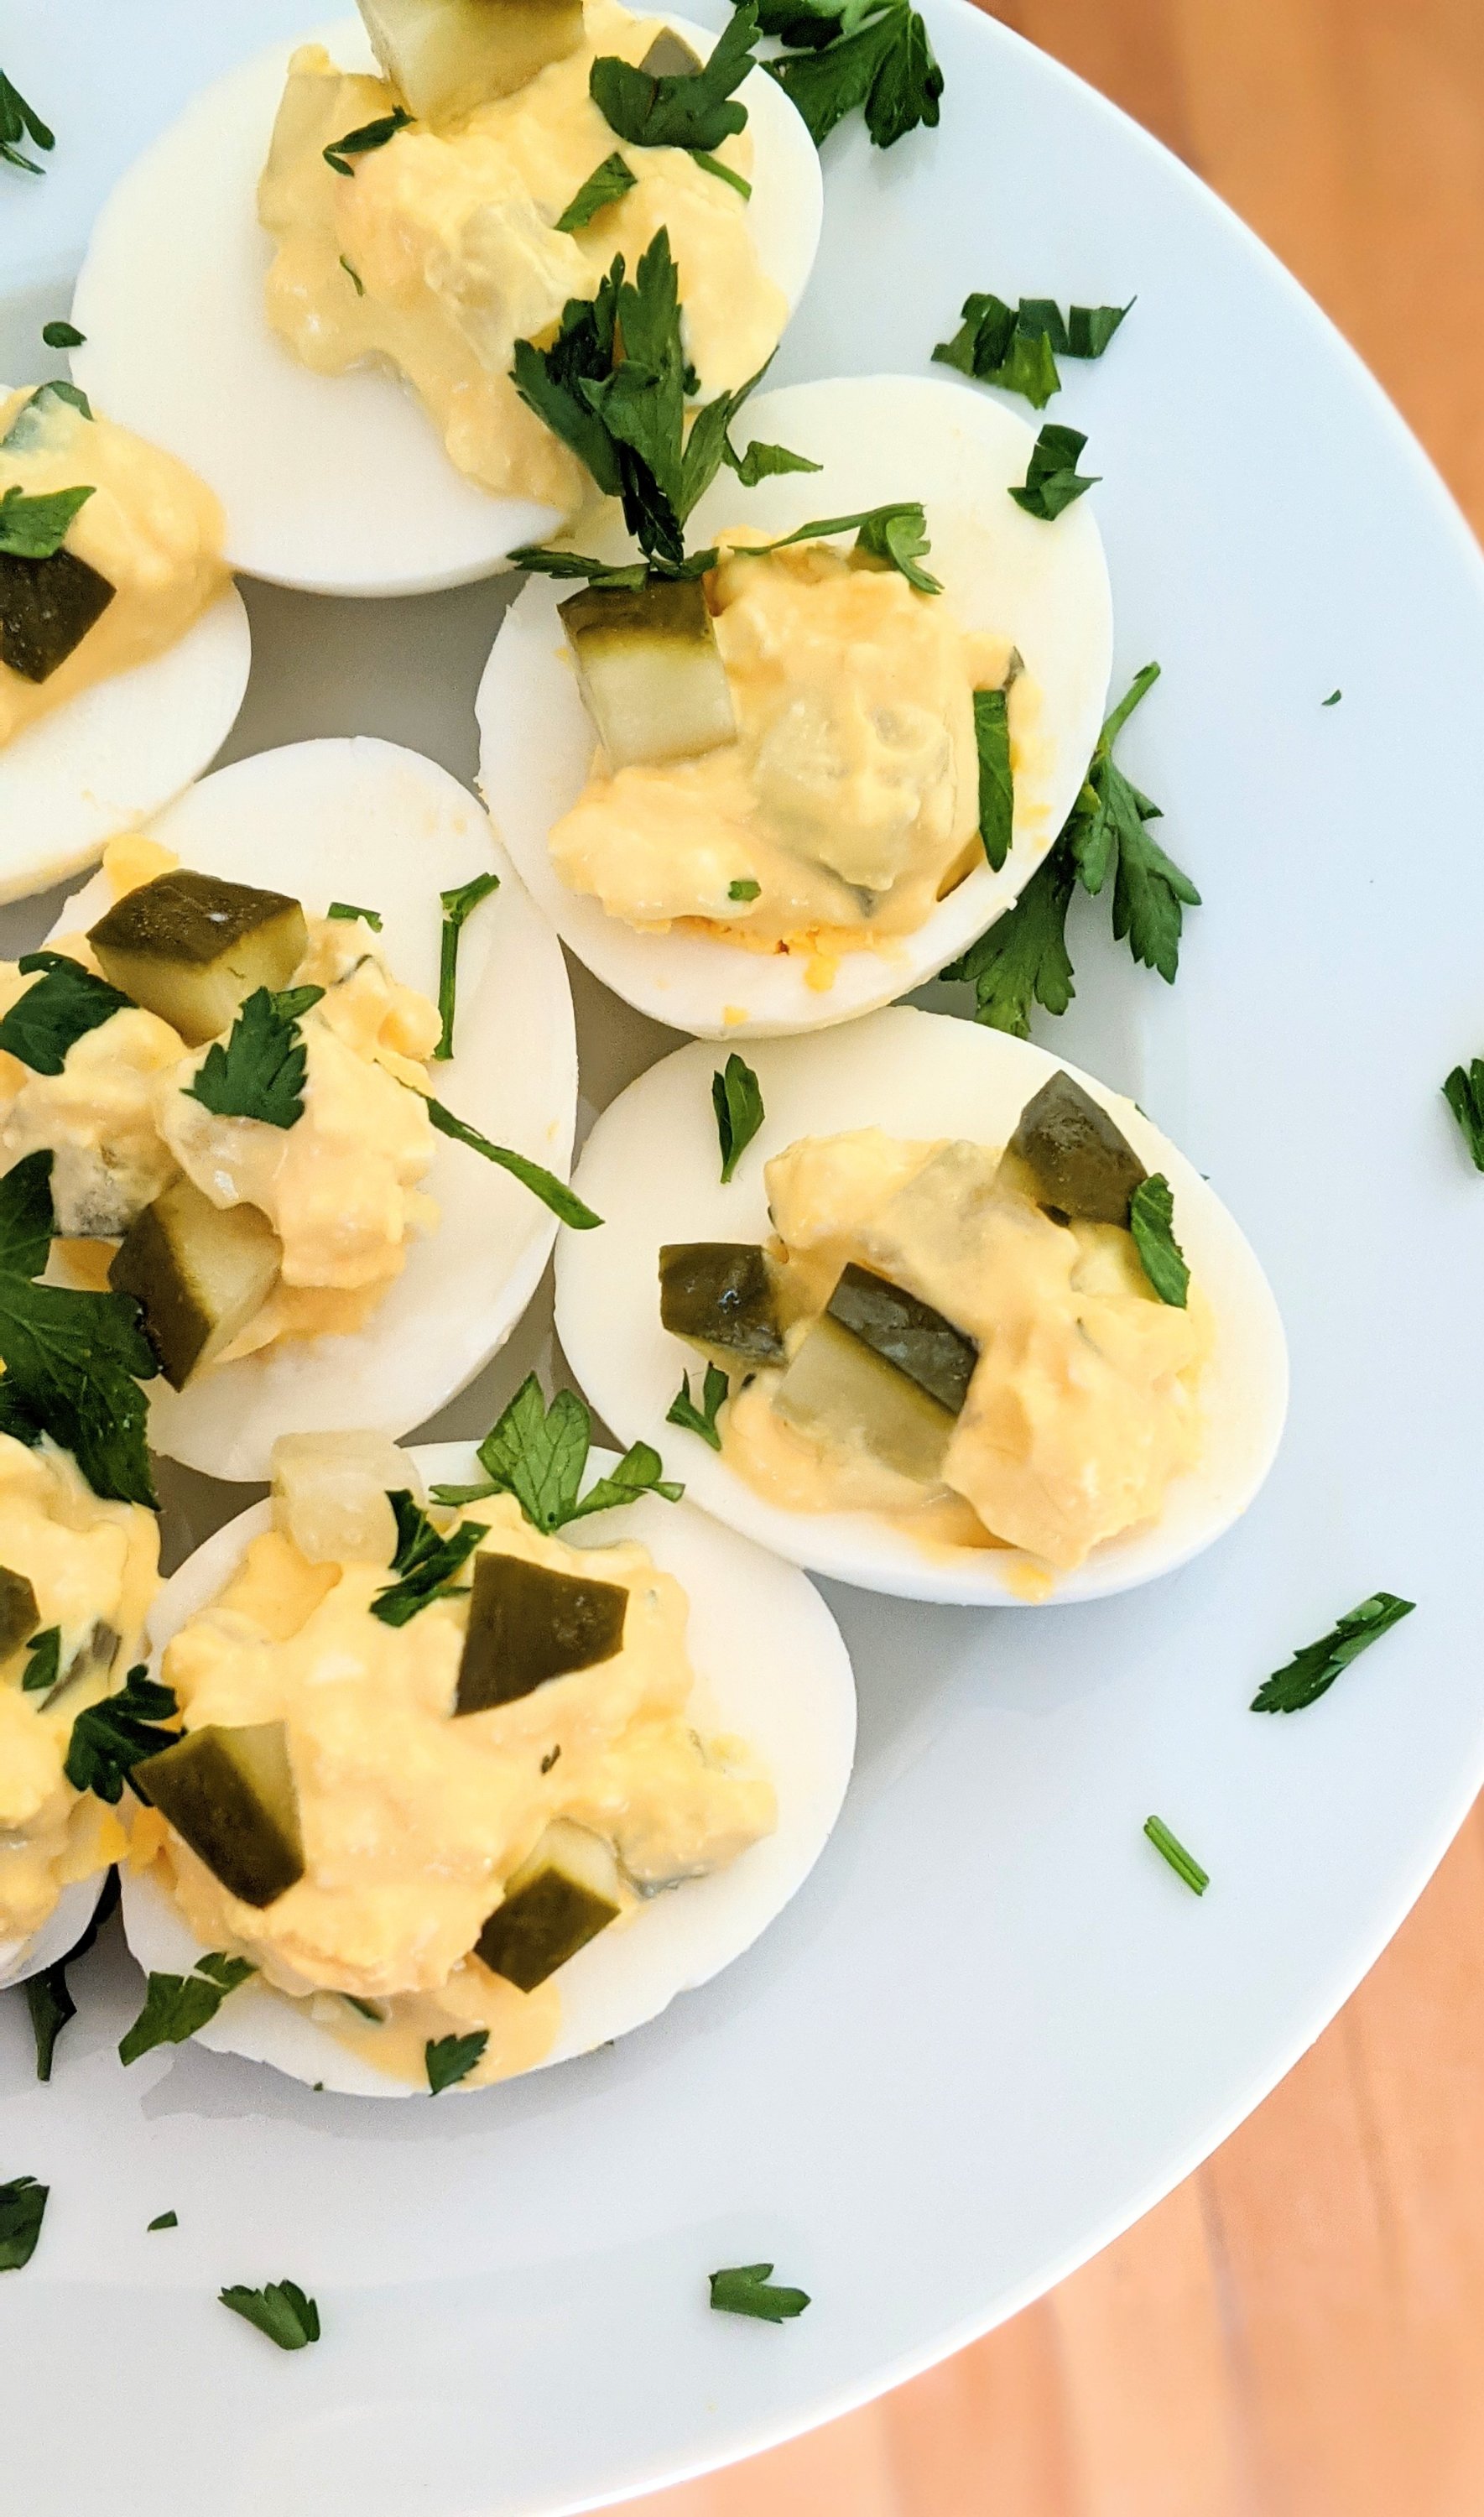 keto vegetarian appetizer recipes low carb meatless side dishes for bbq potluck or party snacks keto low carb no meat recipes deviled eggs with pickles keto